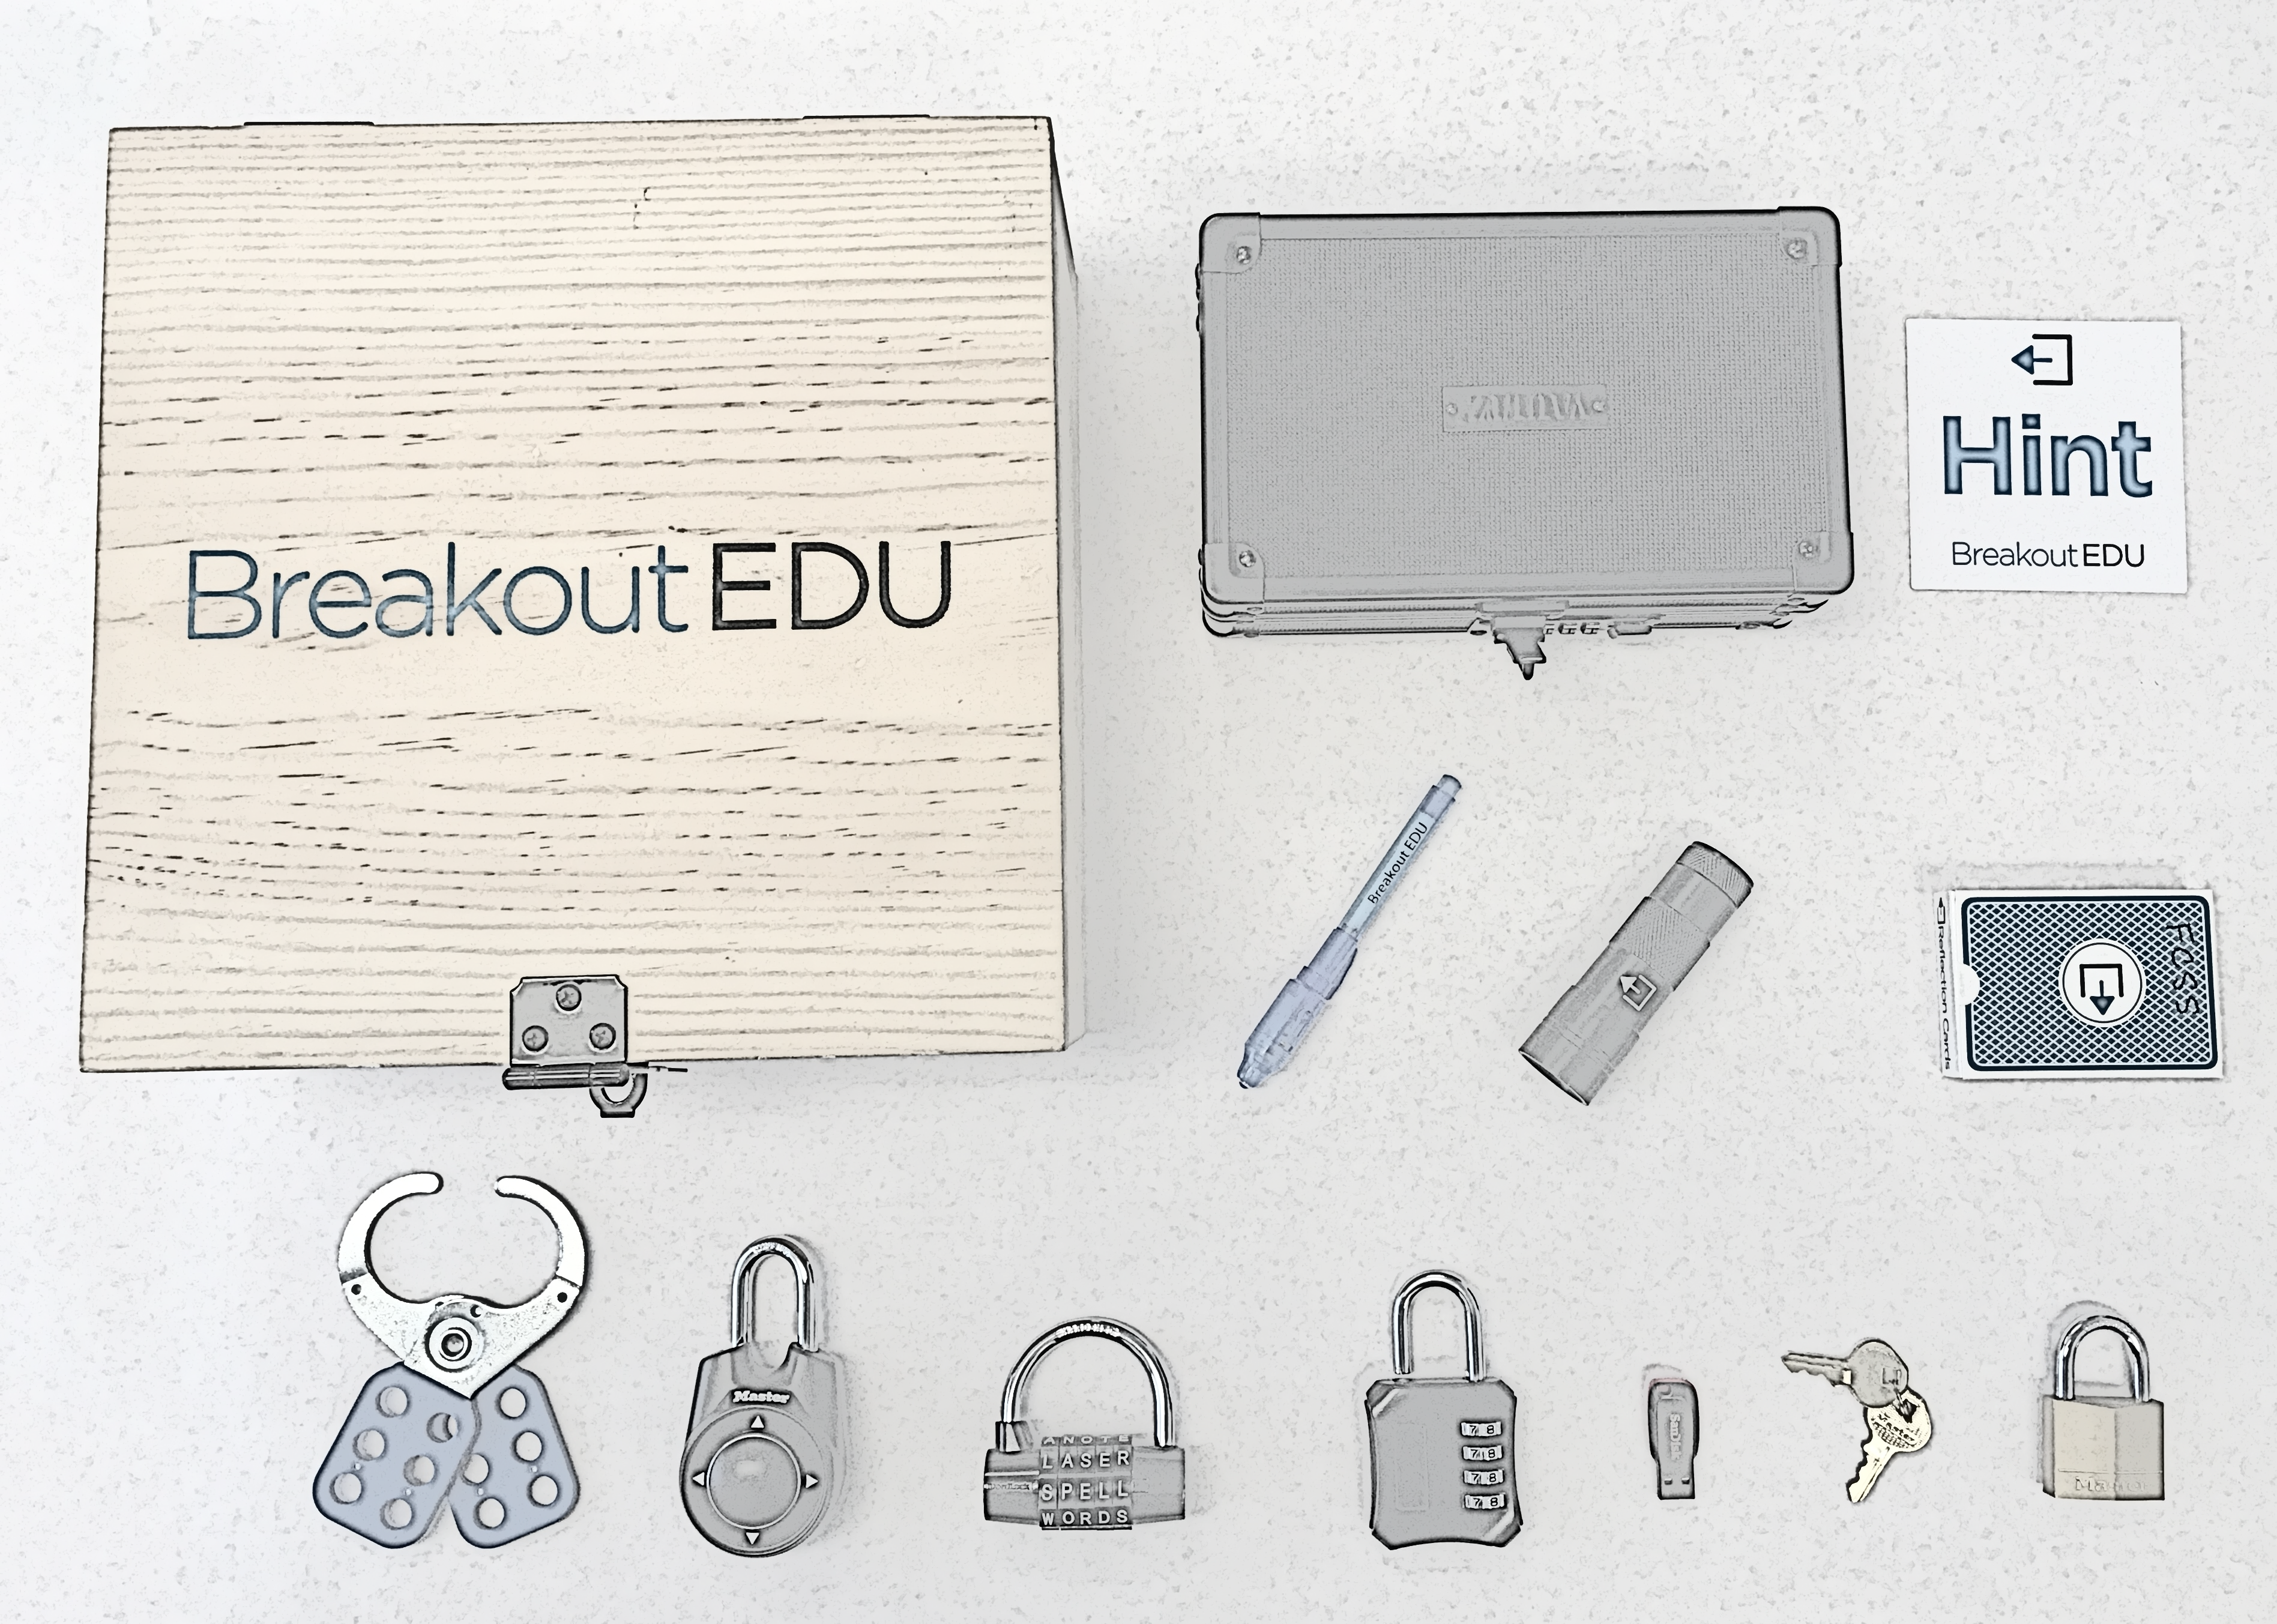 BreakoutEDU box and contents